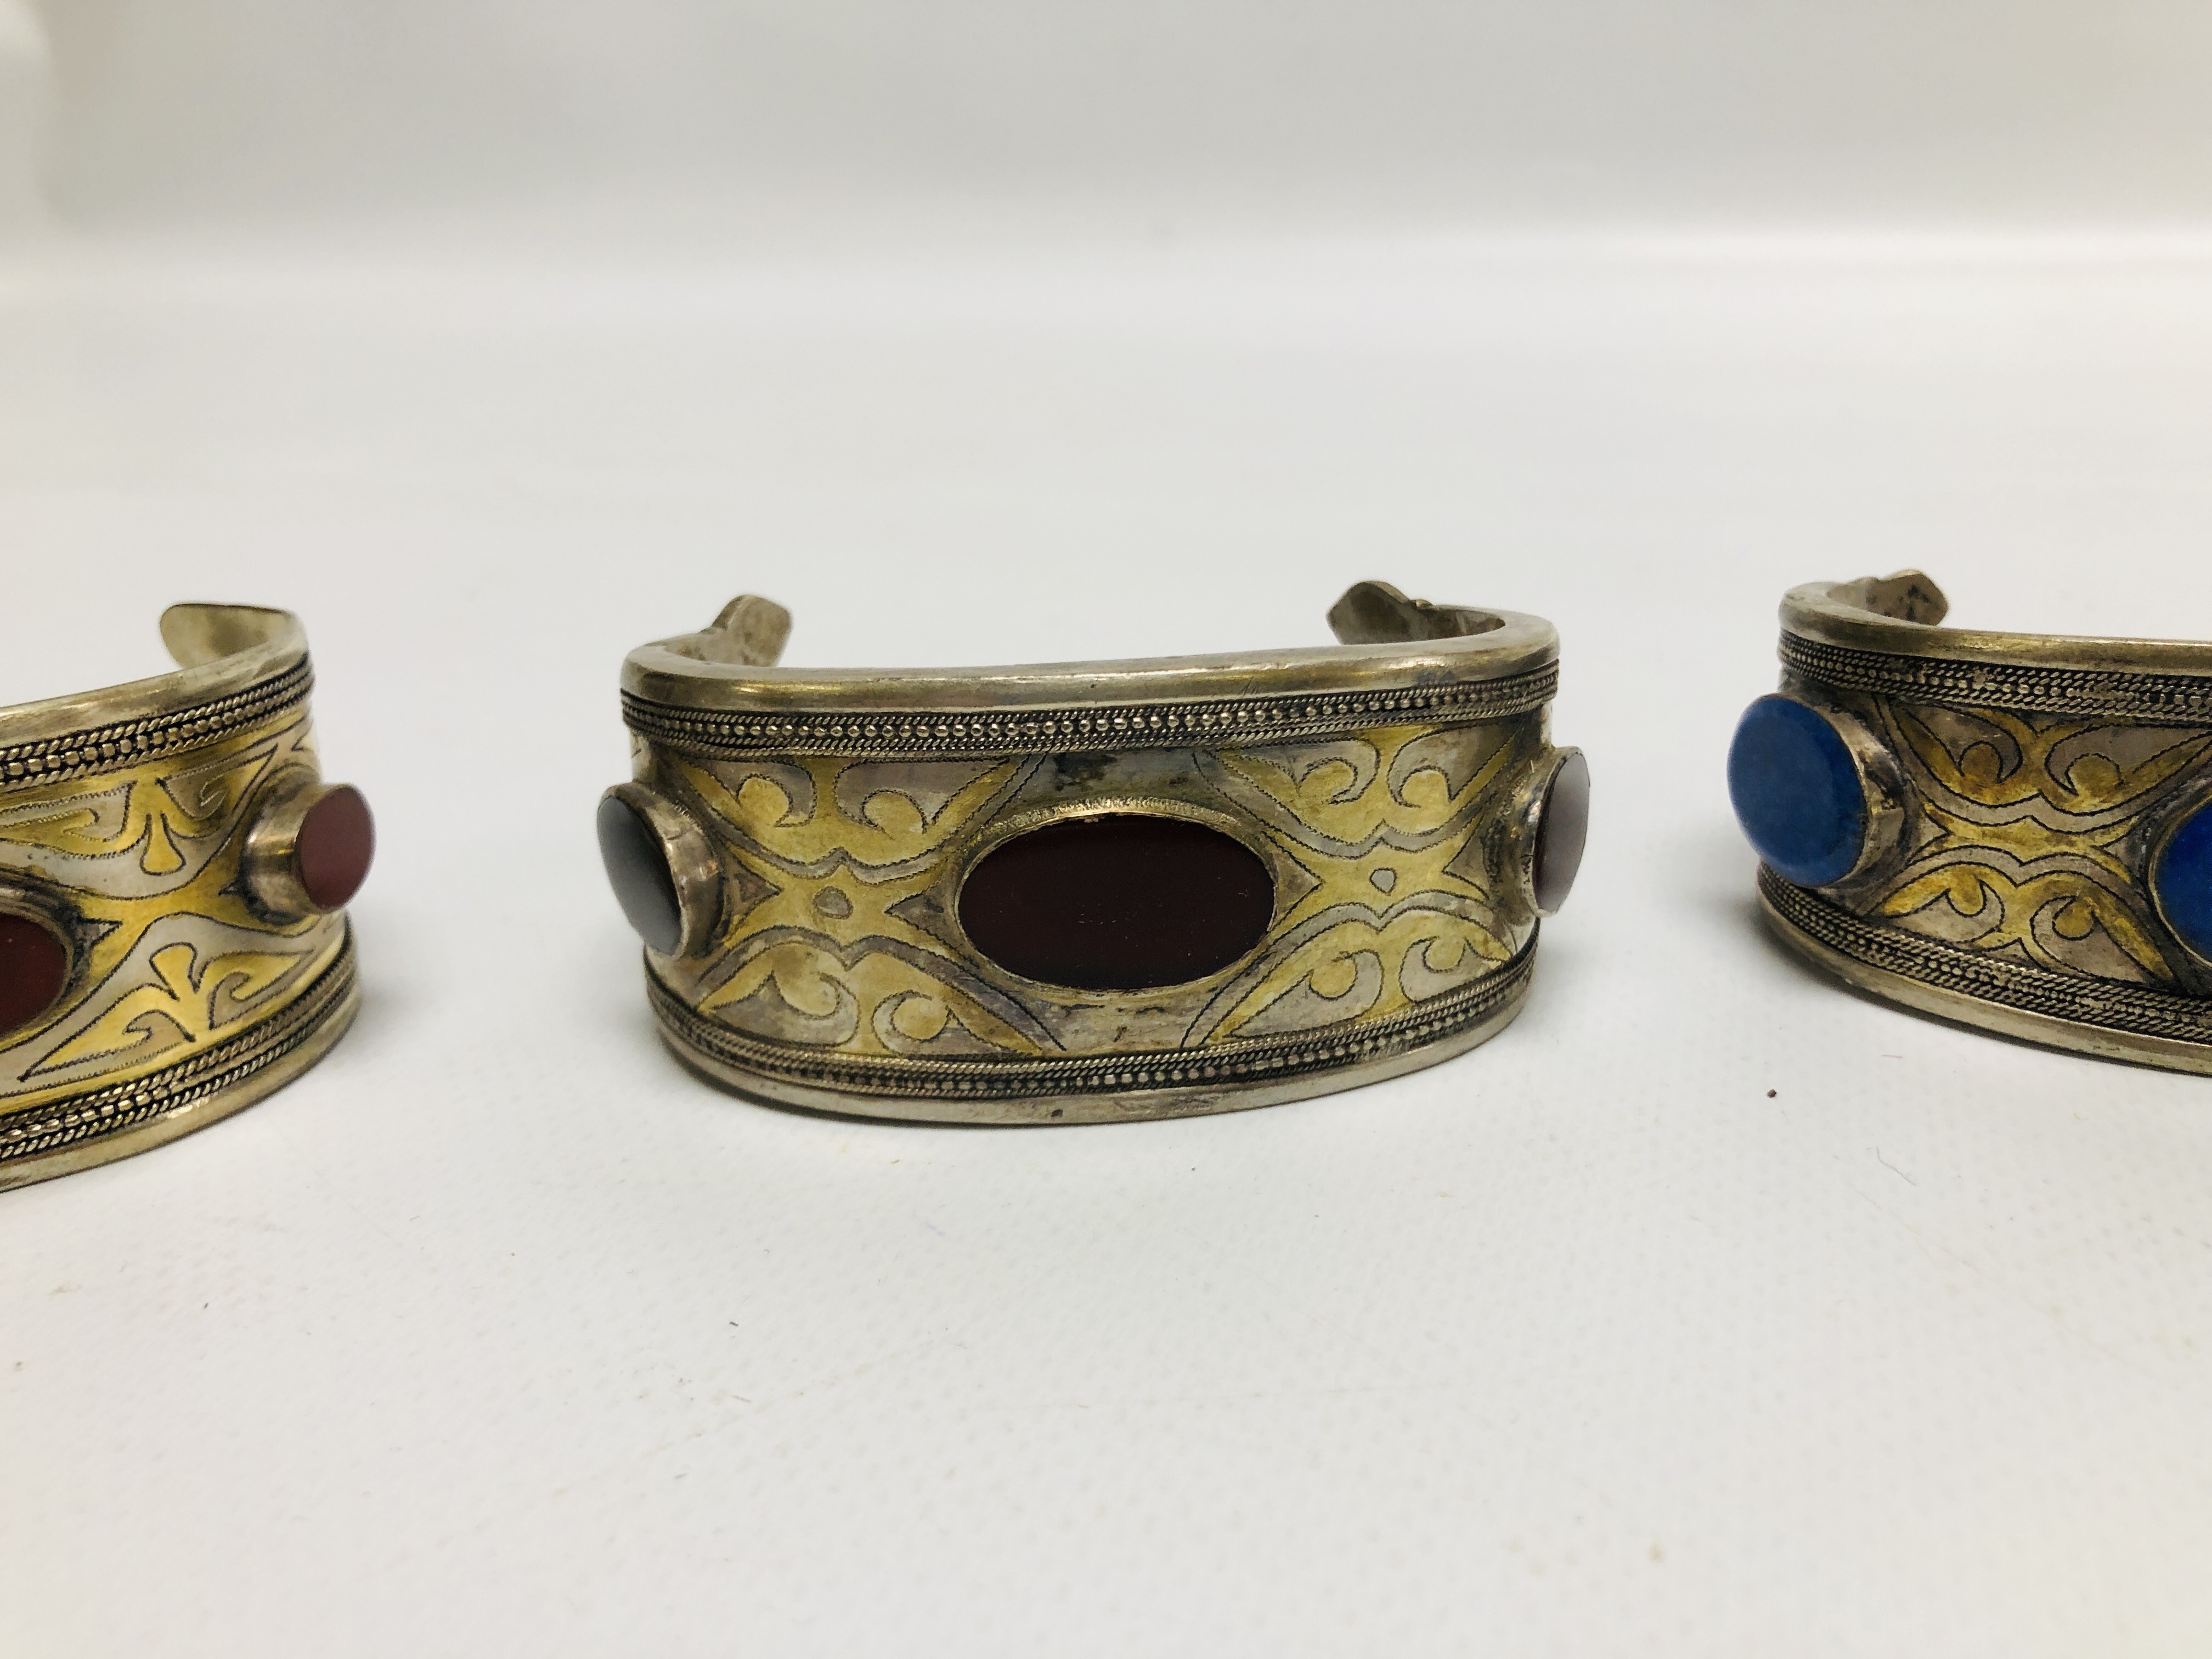 A GROUP OF 4 EASTERN STYLE WHITE METAL CUFF BRACELETS, INSET WITH OVAL STONES. - Image 5 of 8